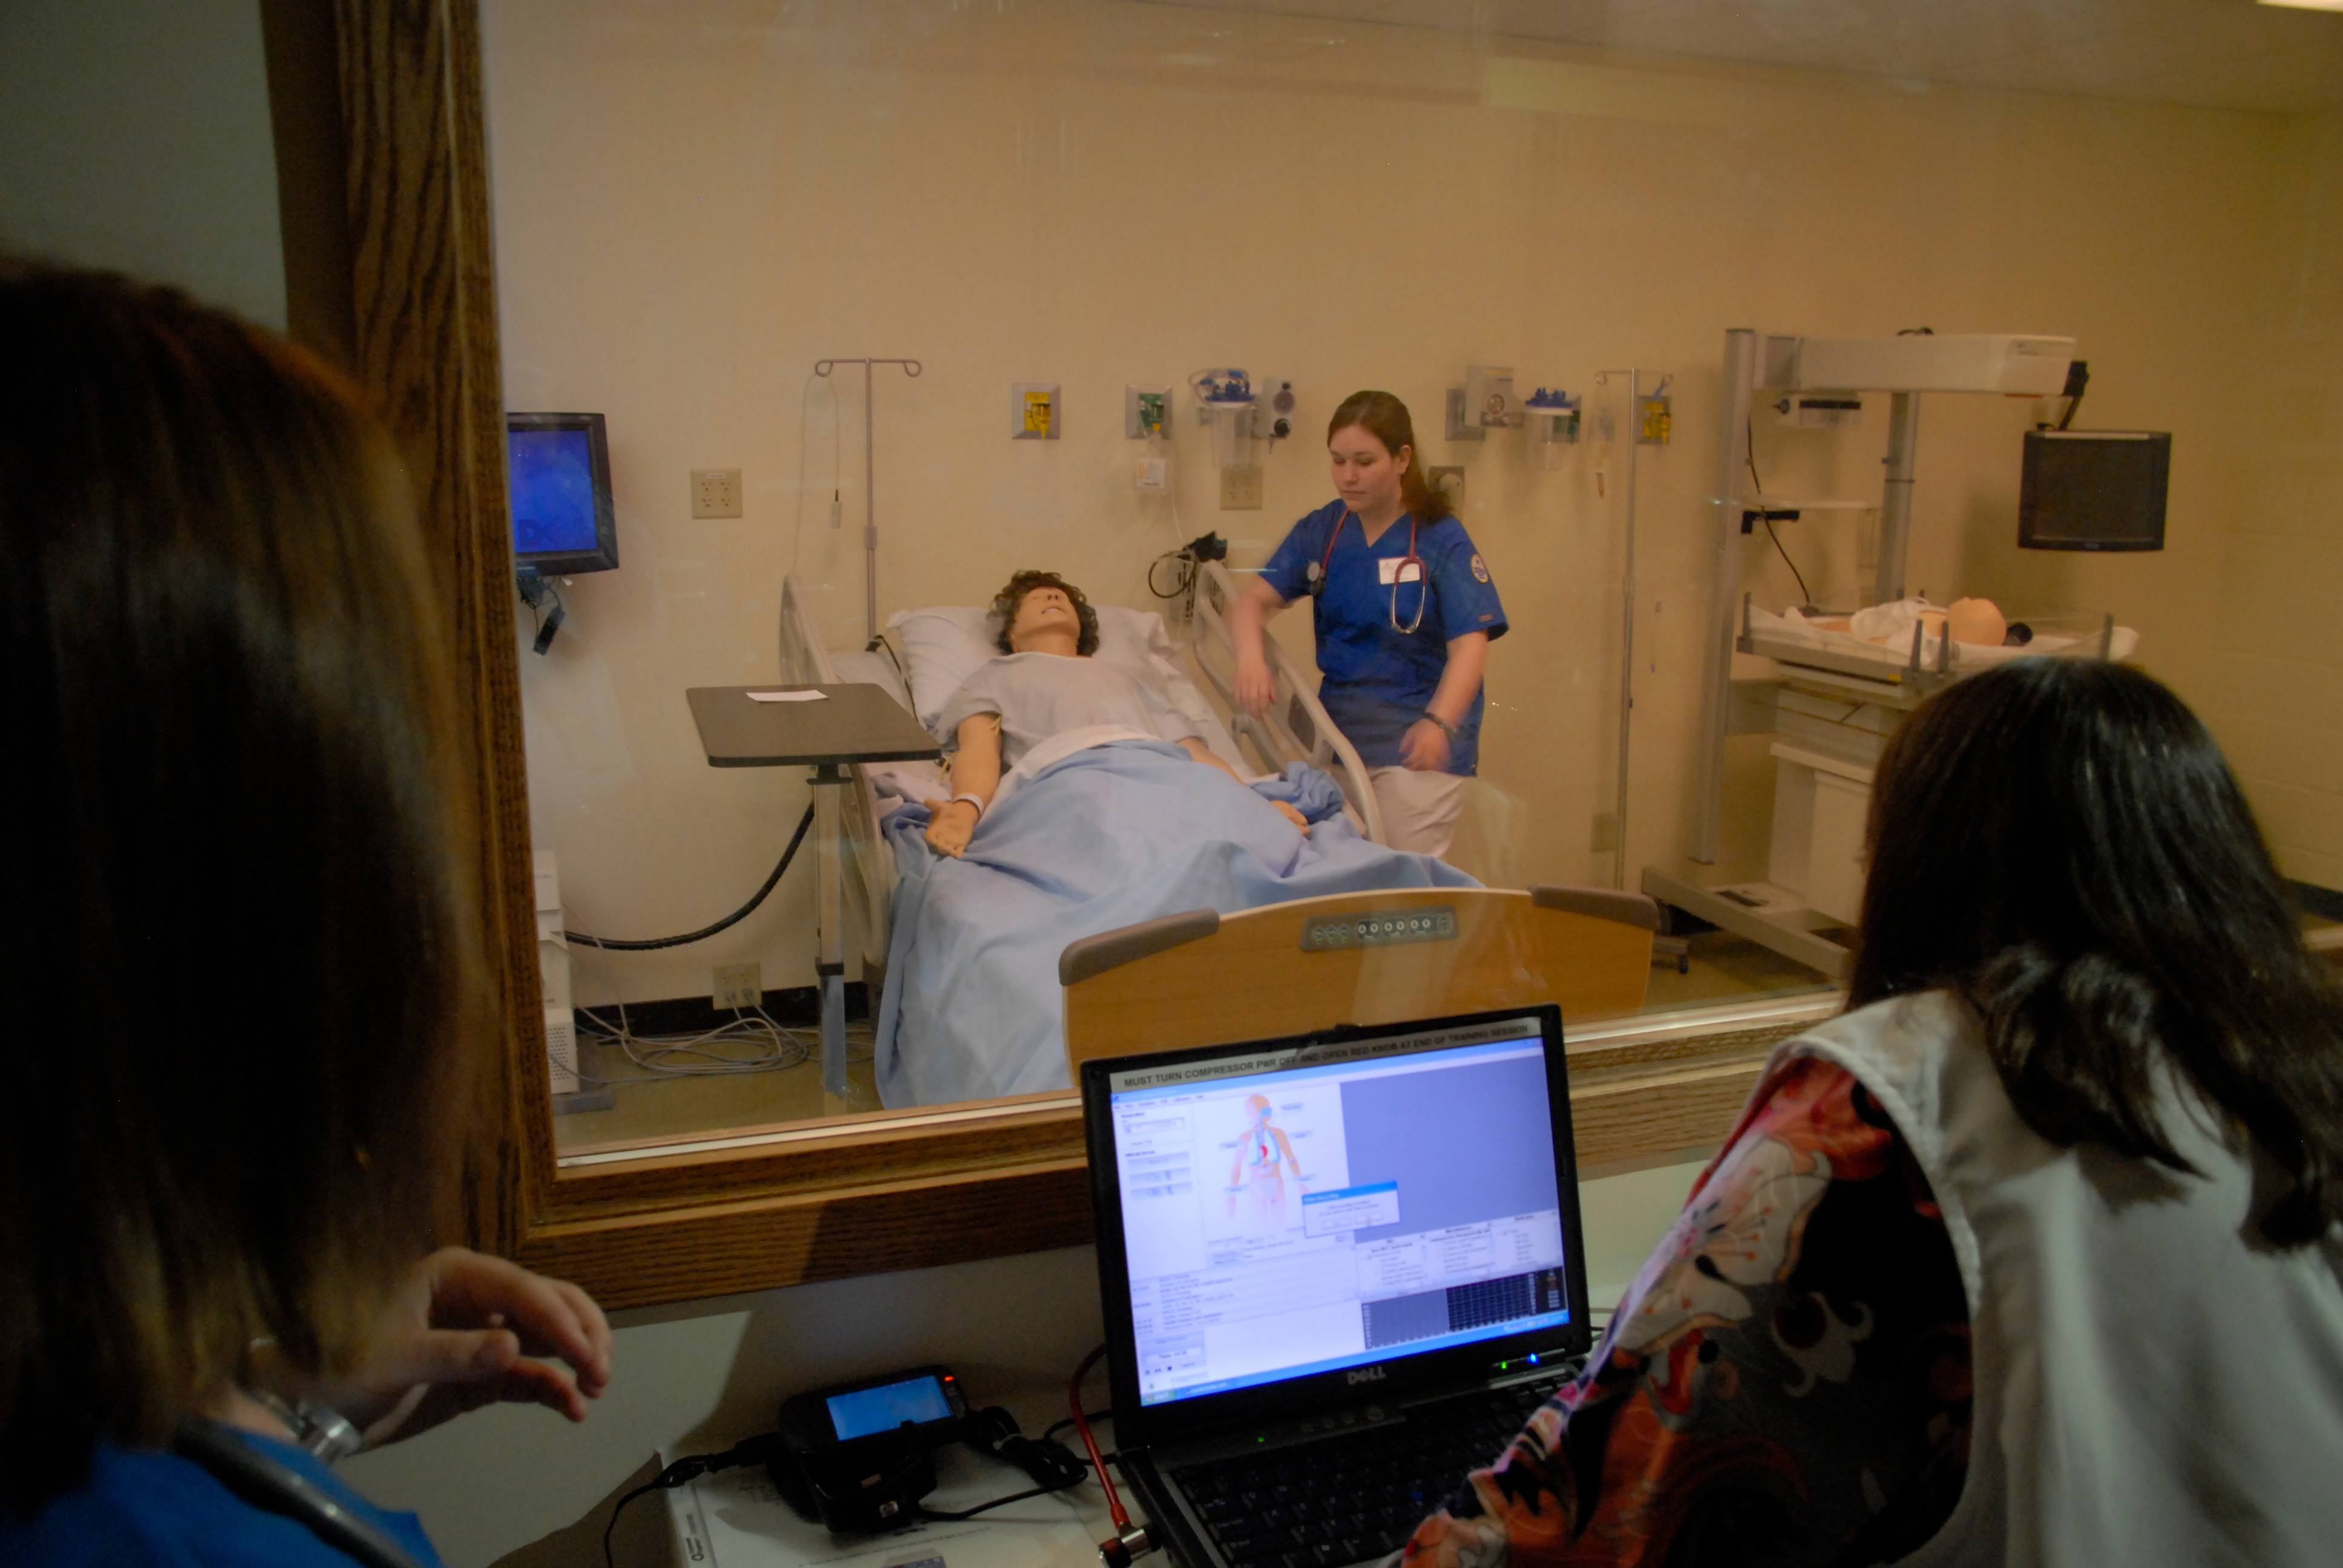 Students in Sim Lab with Observation Room